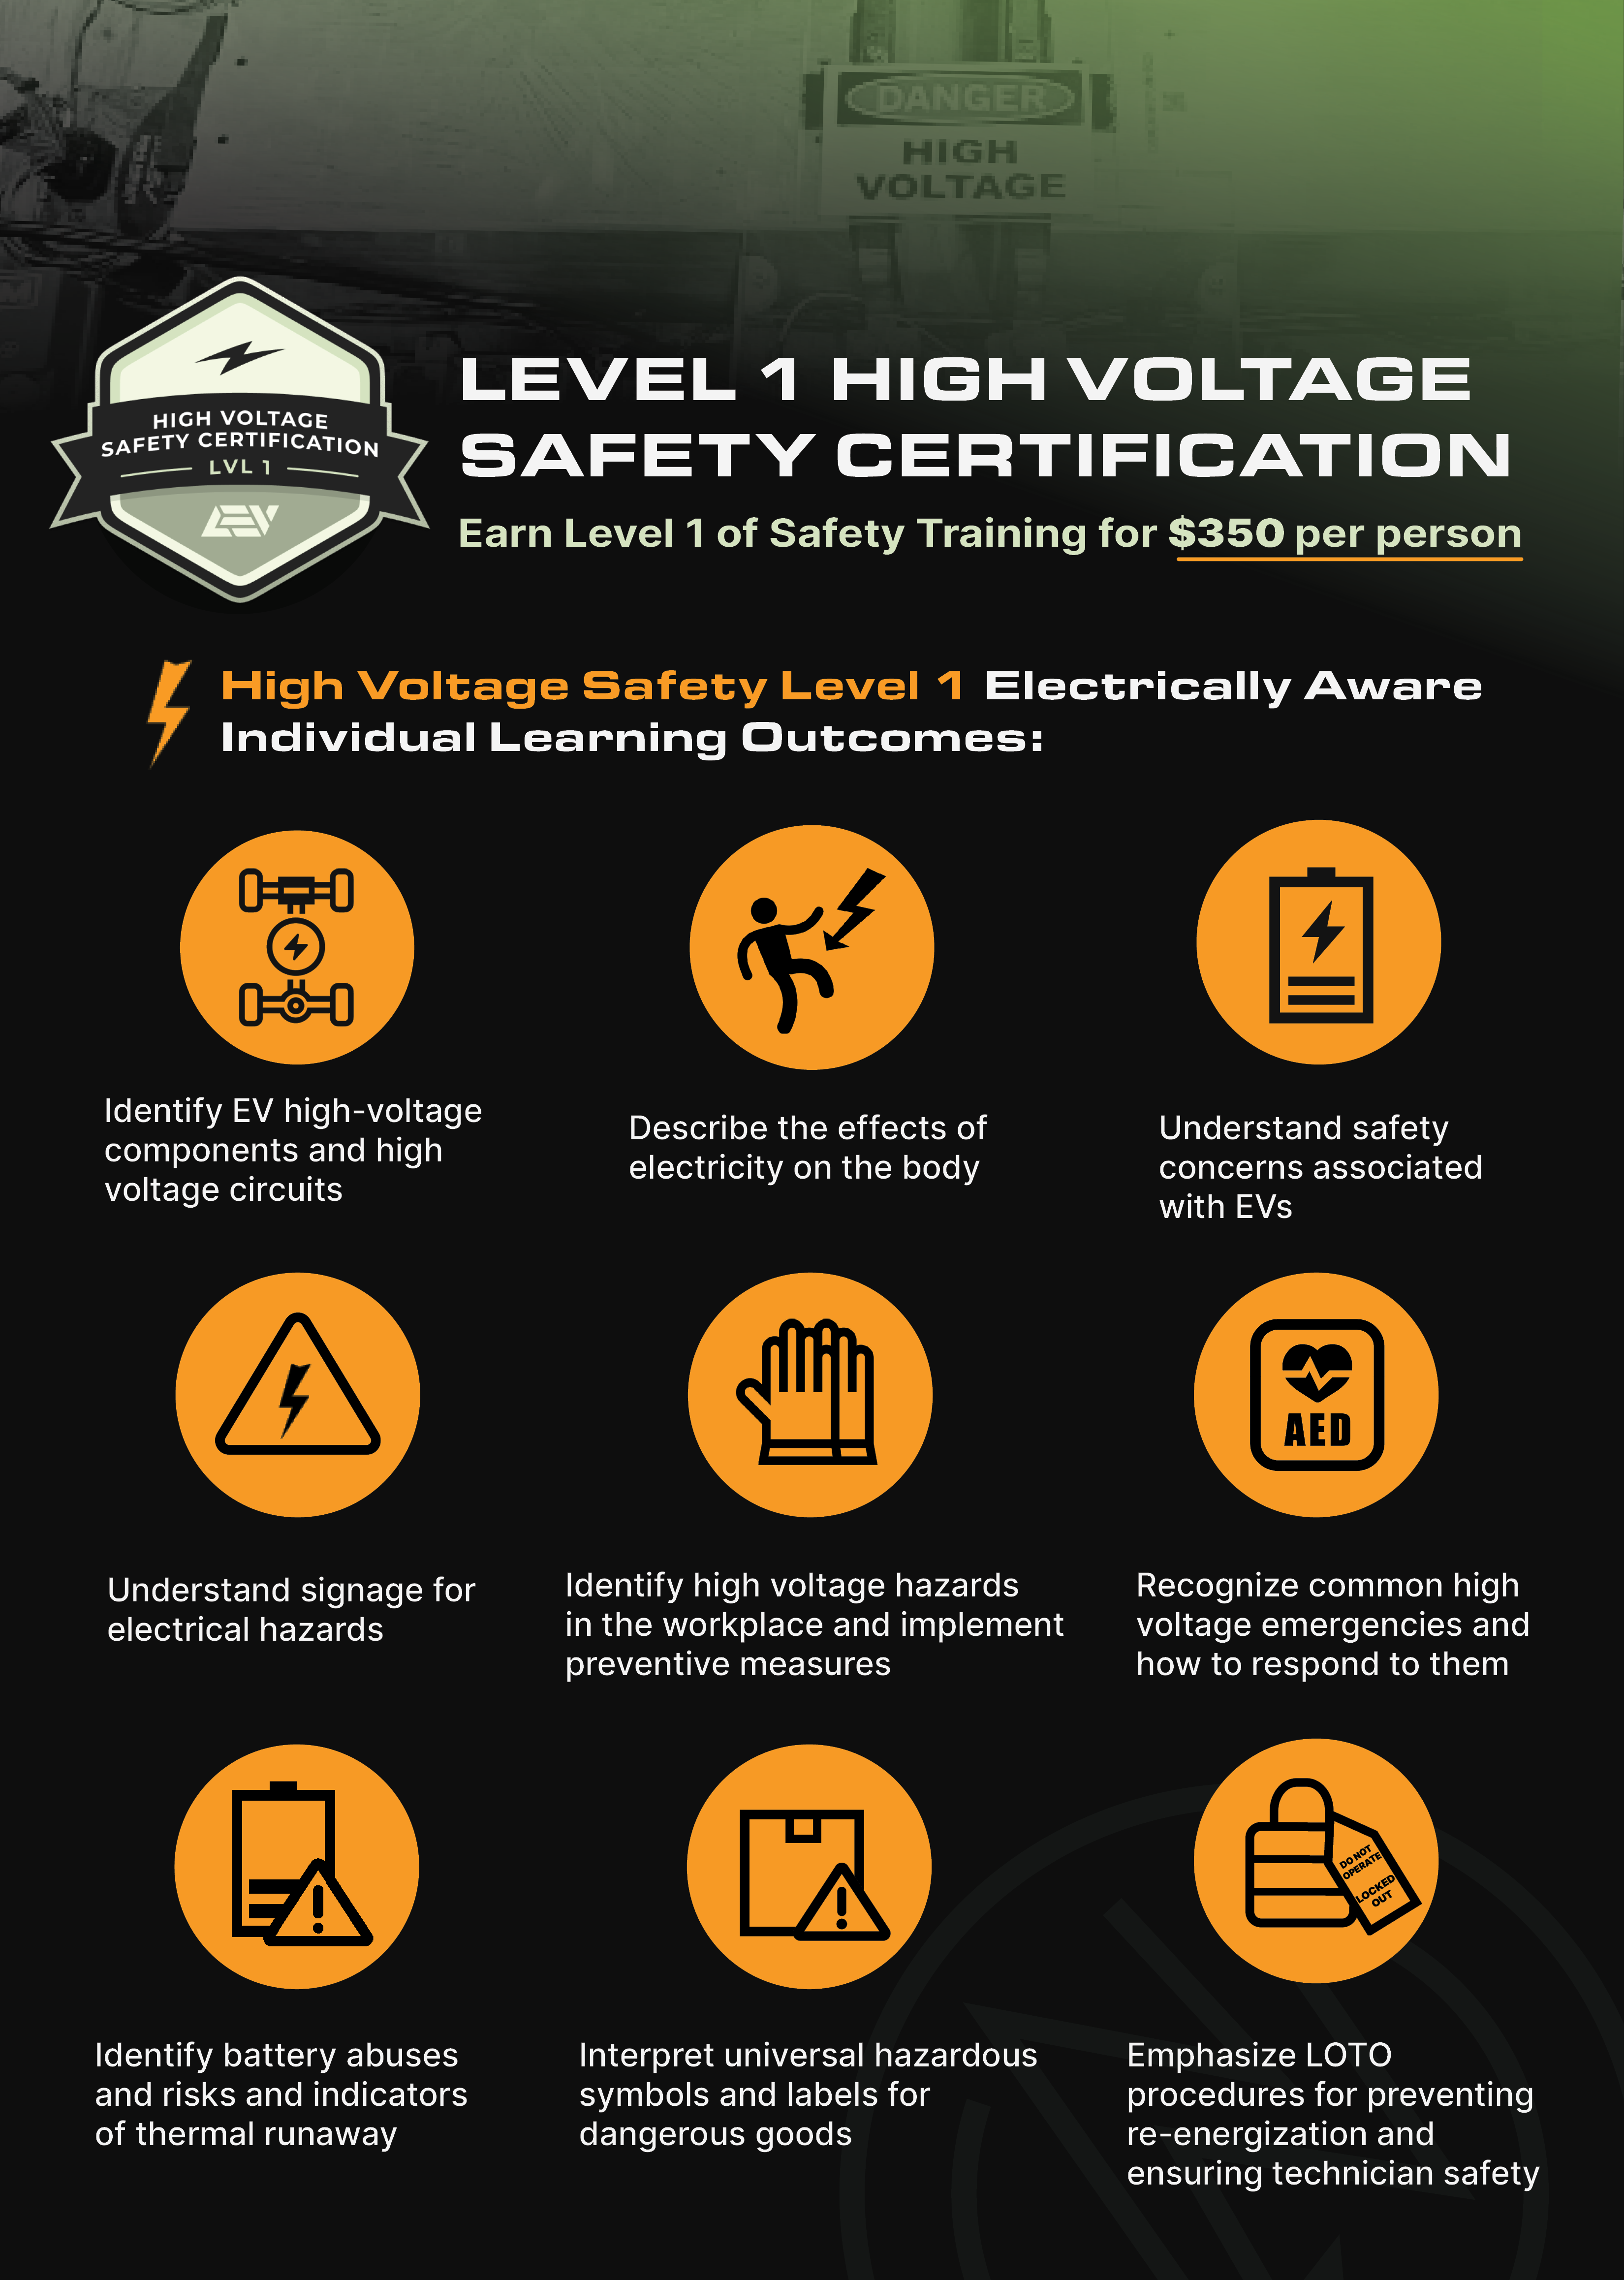 Level 1 High Voltage Safety Virtual Training Course